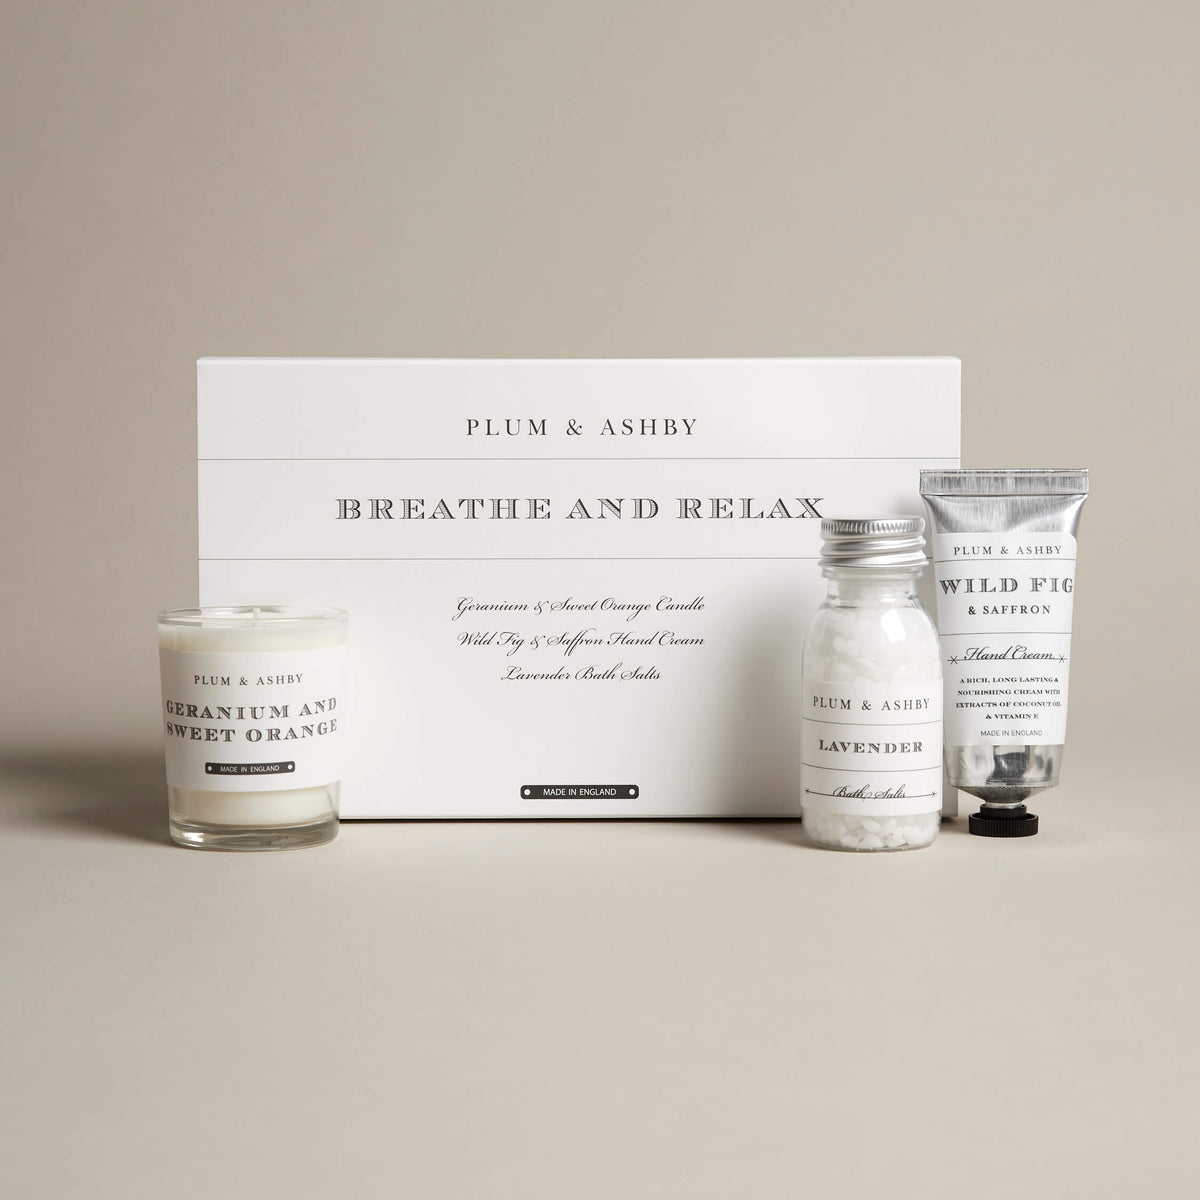 P&A Breathe and relax gift set